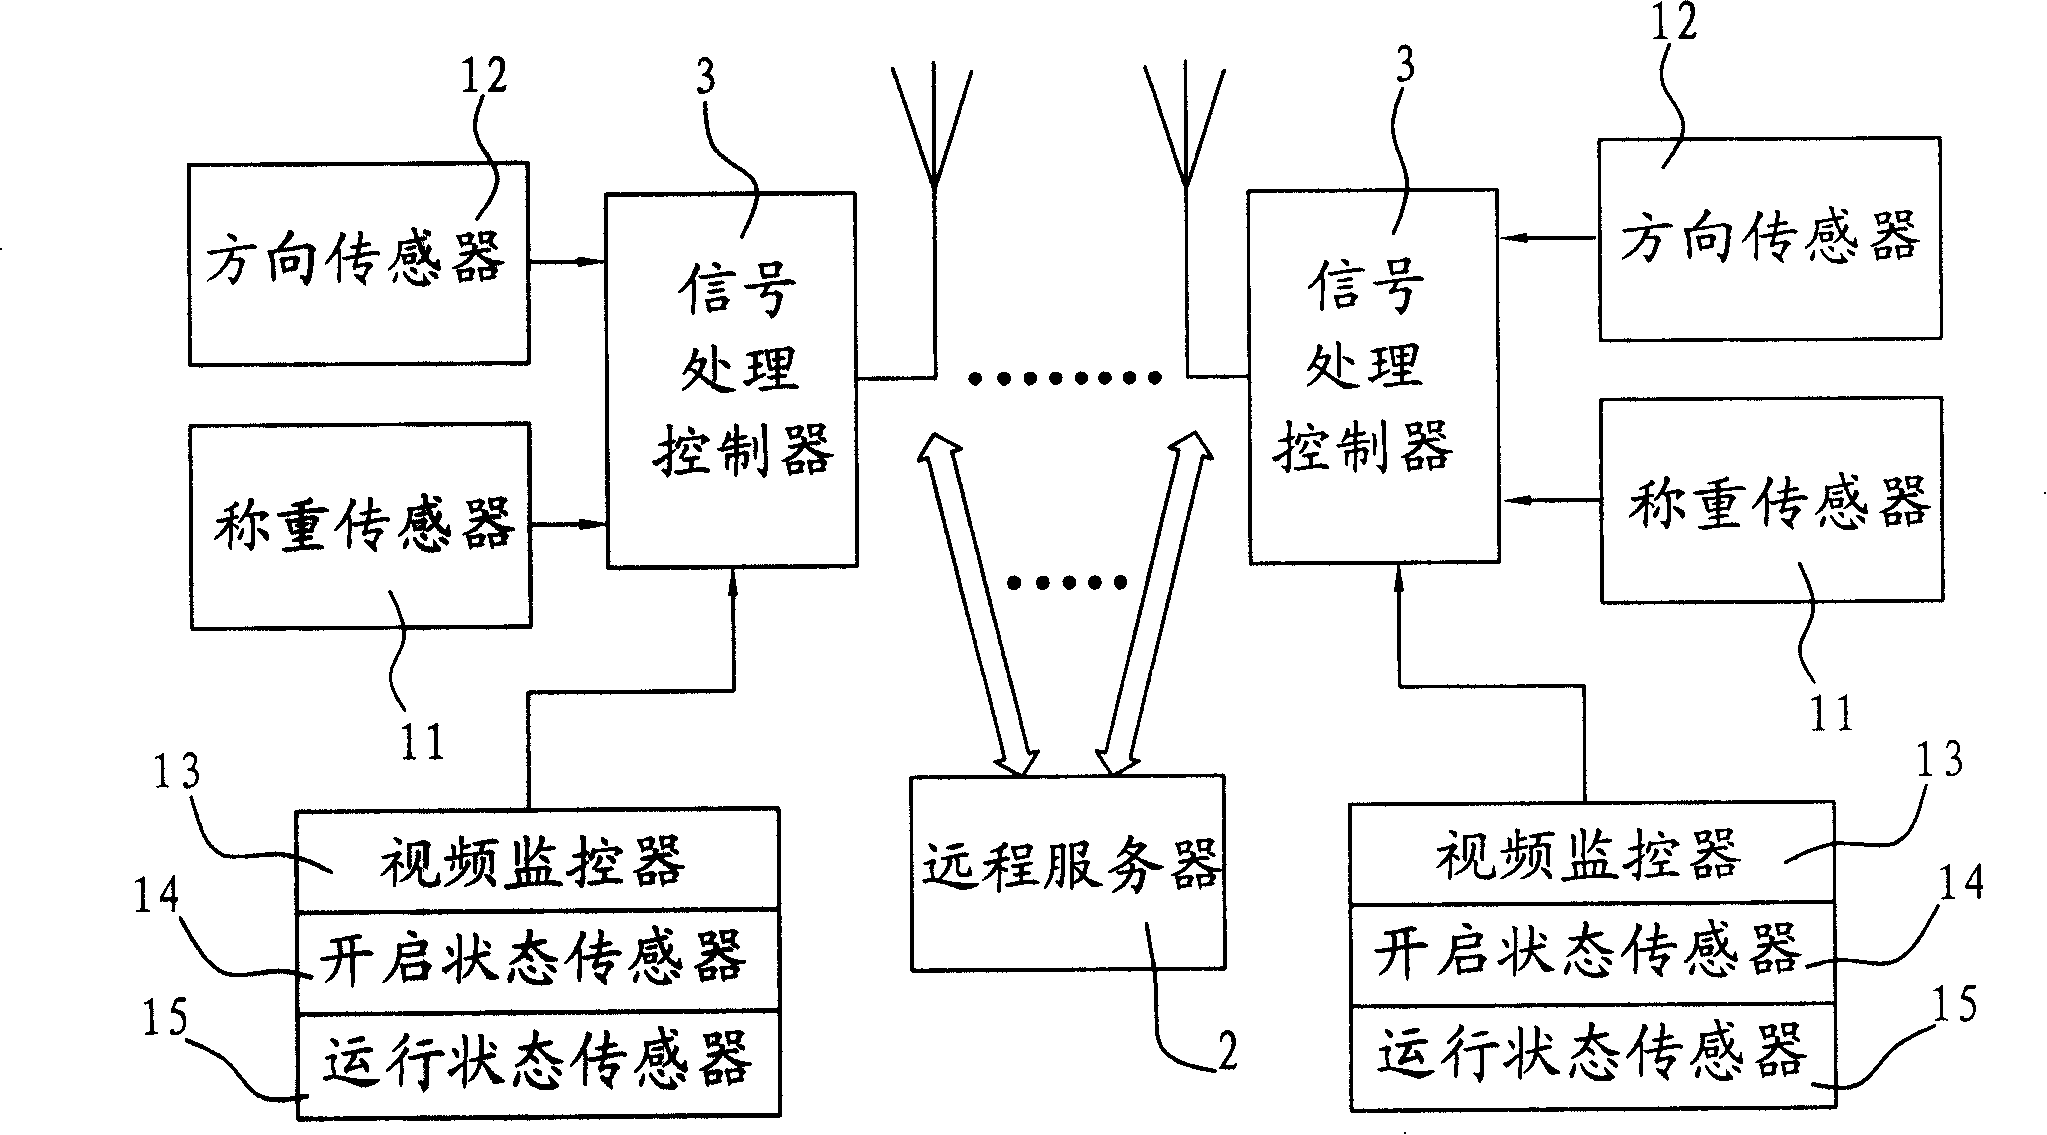 Mining manufacture safety management system and method